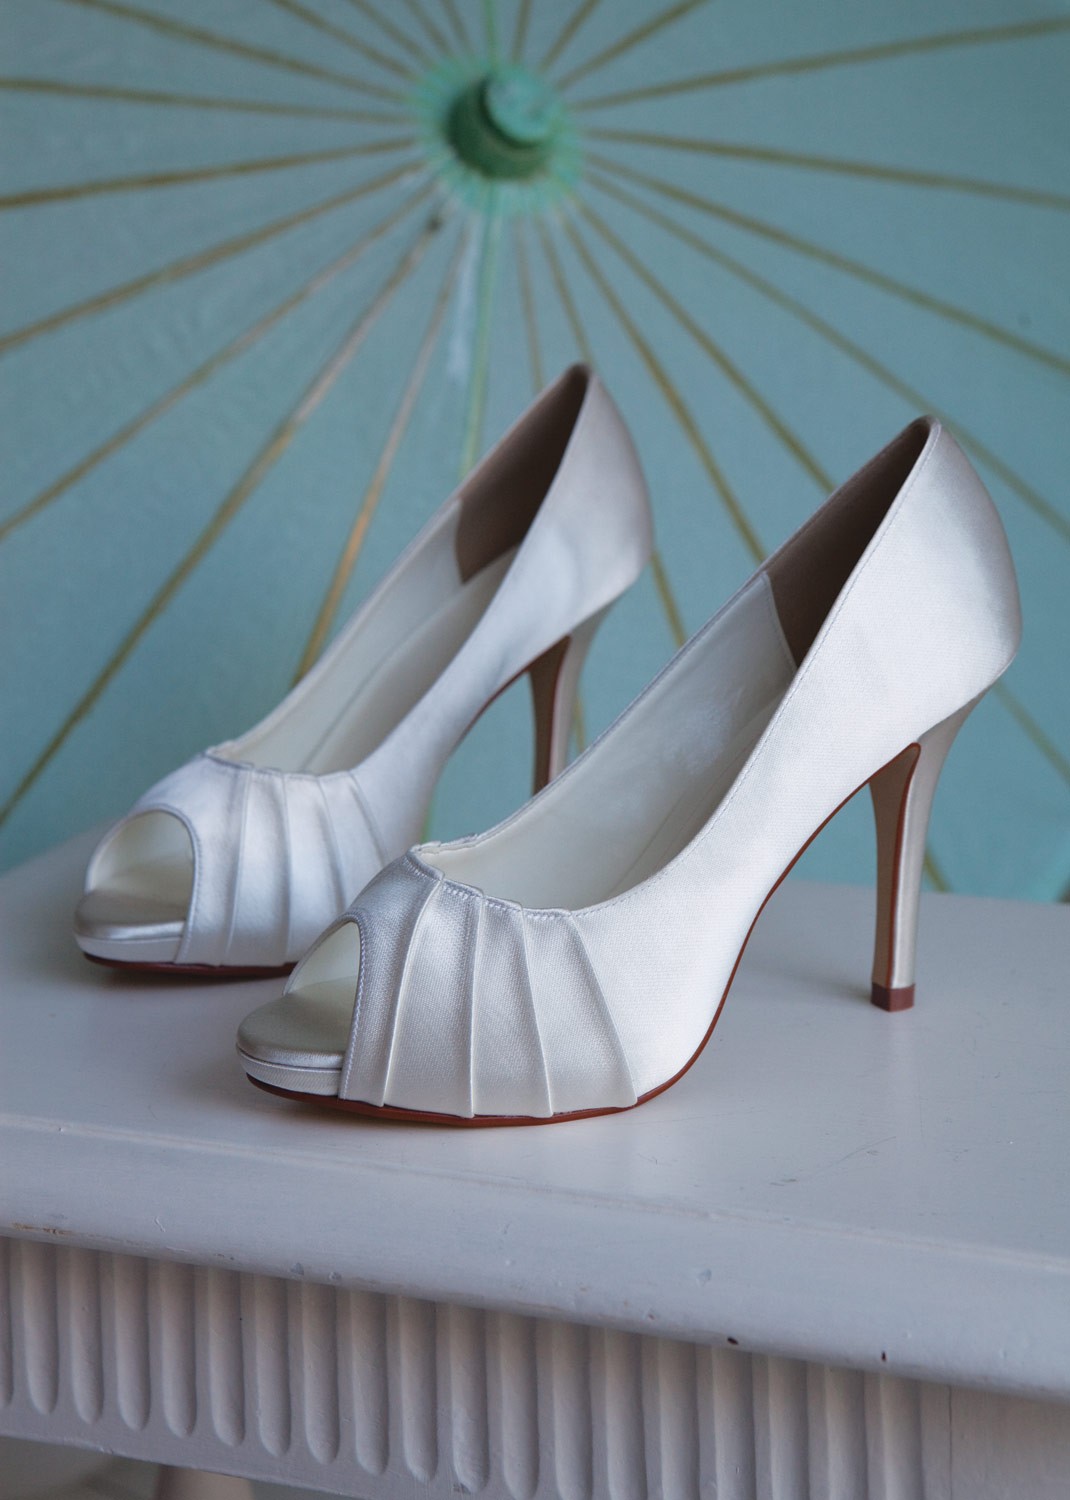 ... mariage ouverts Clips chaussures mariage Promo chaussures mariÃ©e